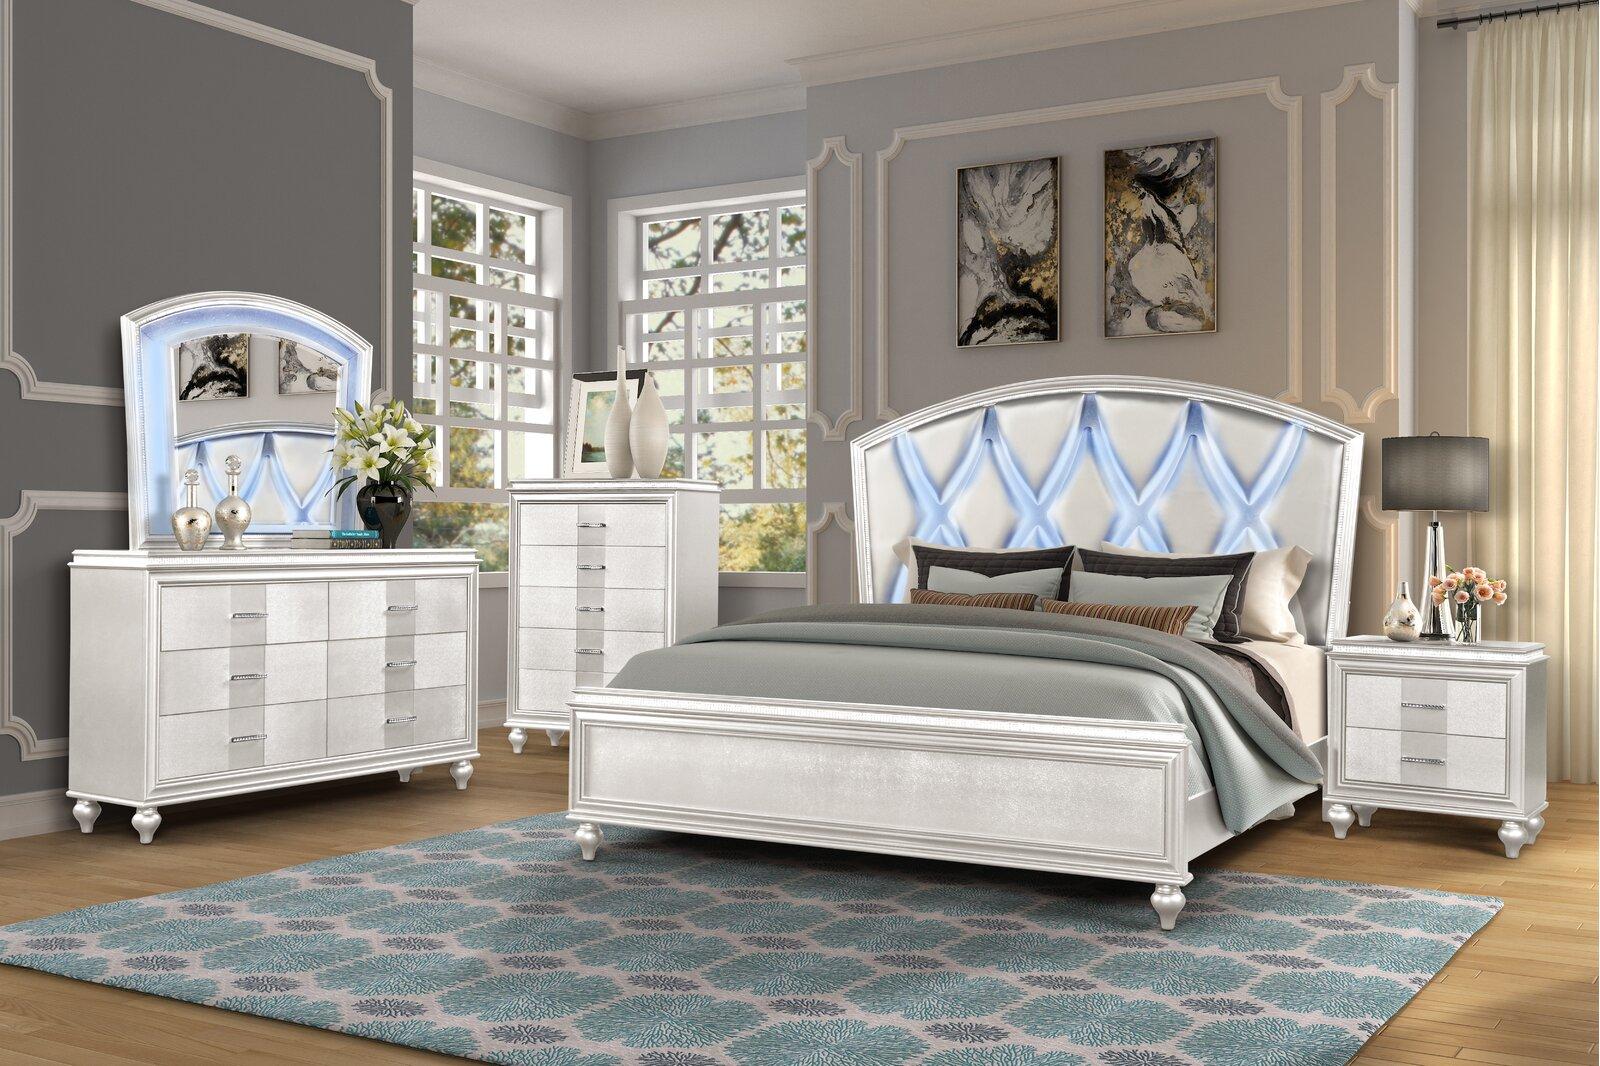 Cherry Queen Bedroom Set 4 Pcs LOUIS PHILLIPE Galaxy Home Traditional Modern